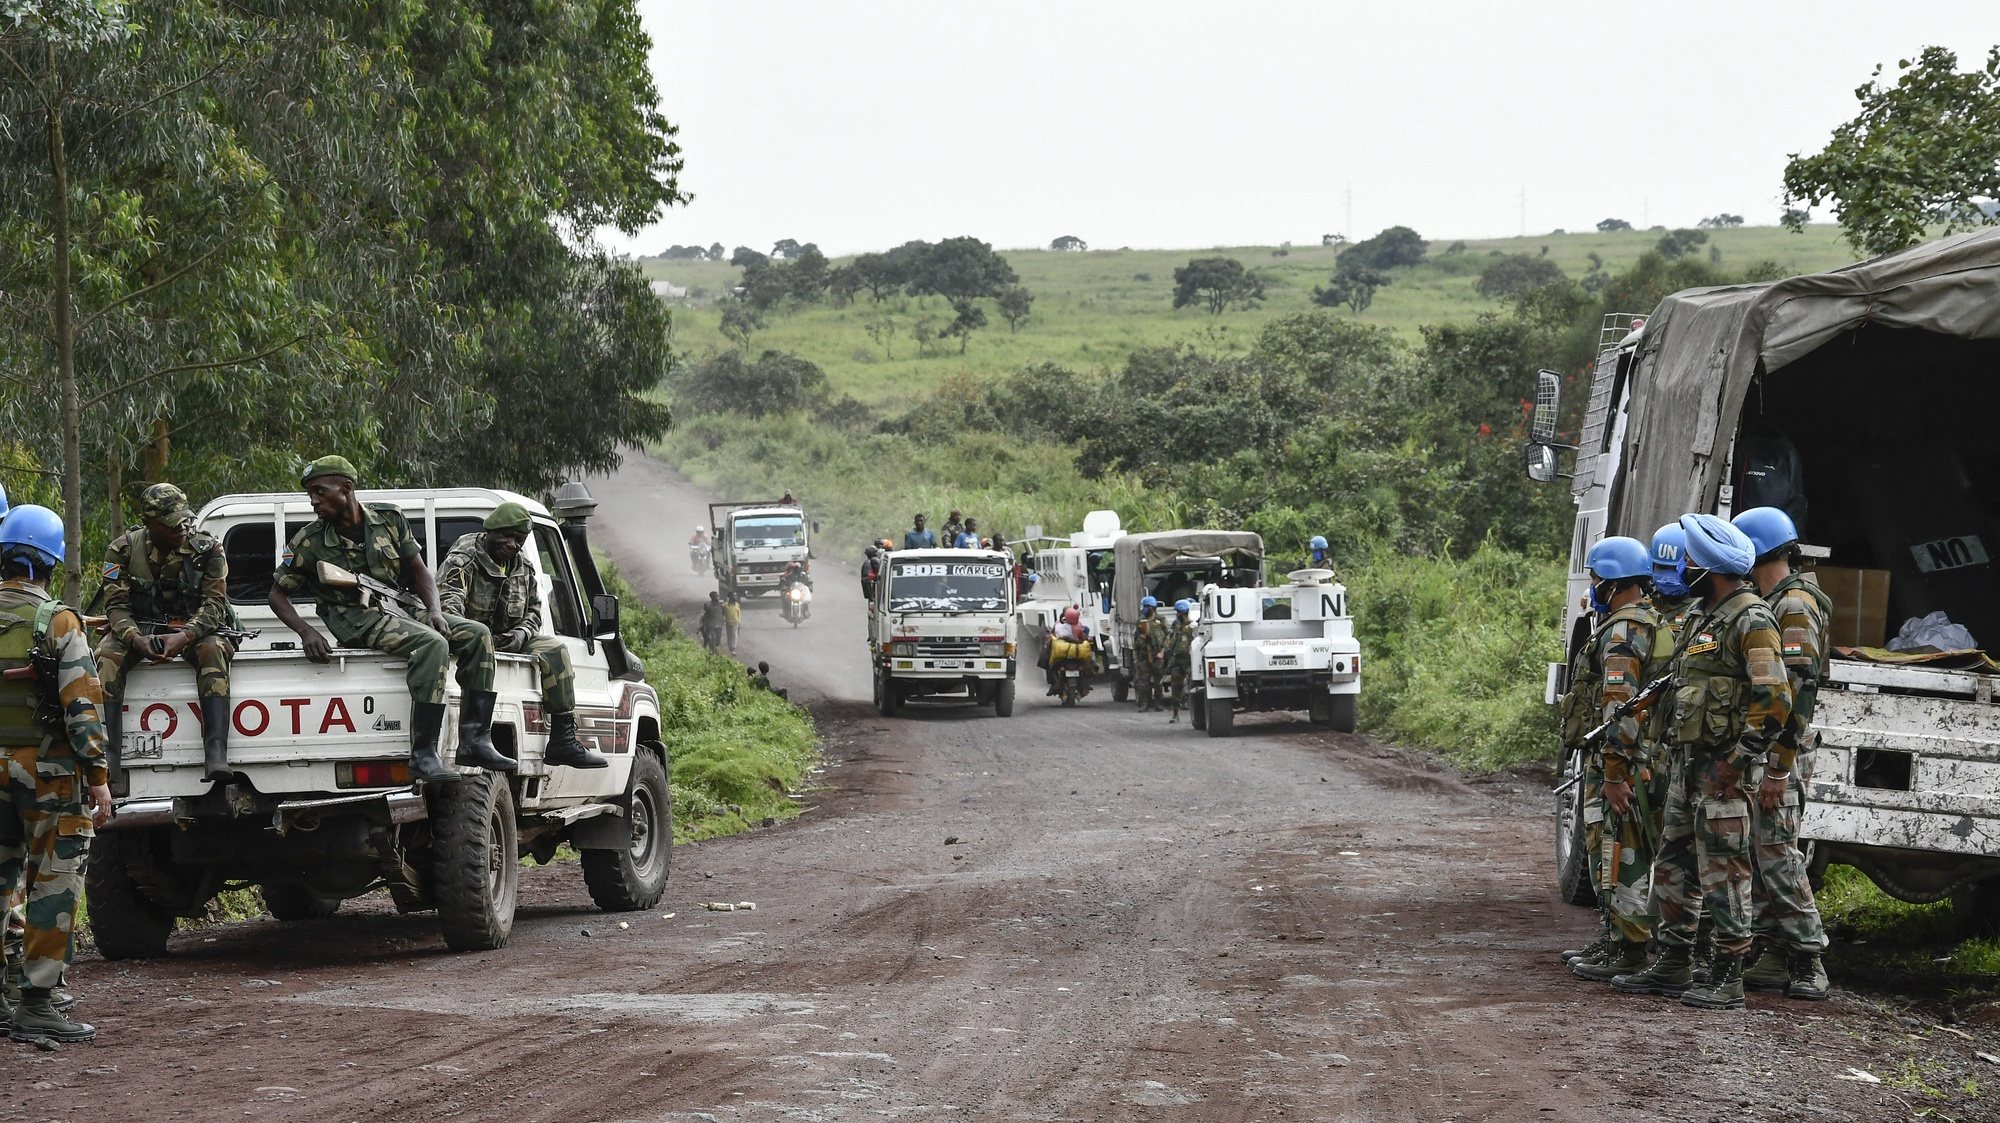 epa09030027 United Nations and Congo Armed Forces soldiers secure a road near the scene of an attack on the edge of the Virunga National Park where Italy&#039;s ambassador to the Democratic Republic of Congo and two others were killed, in Nyiragongo, North Kivu province,  Democratic Republic of Congo, 22 February 2021. According to the Italian Foreign Ministry, the Italian Ambassador to the DR Congo, Luca Attanasio, and a security member were killed in an apparent attack on a UN convoy near Goma, Democratic Republic of the Congo. A statement by the World Food Programme (WFP) said that a WFP driver was also among the dead.  EPA/STR